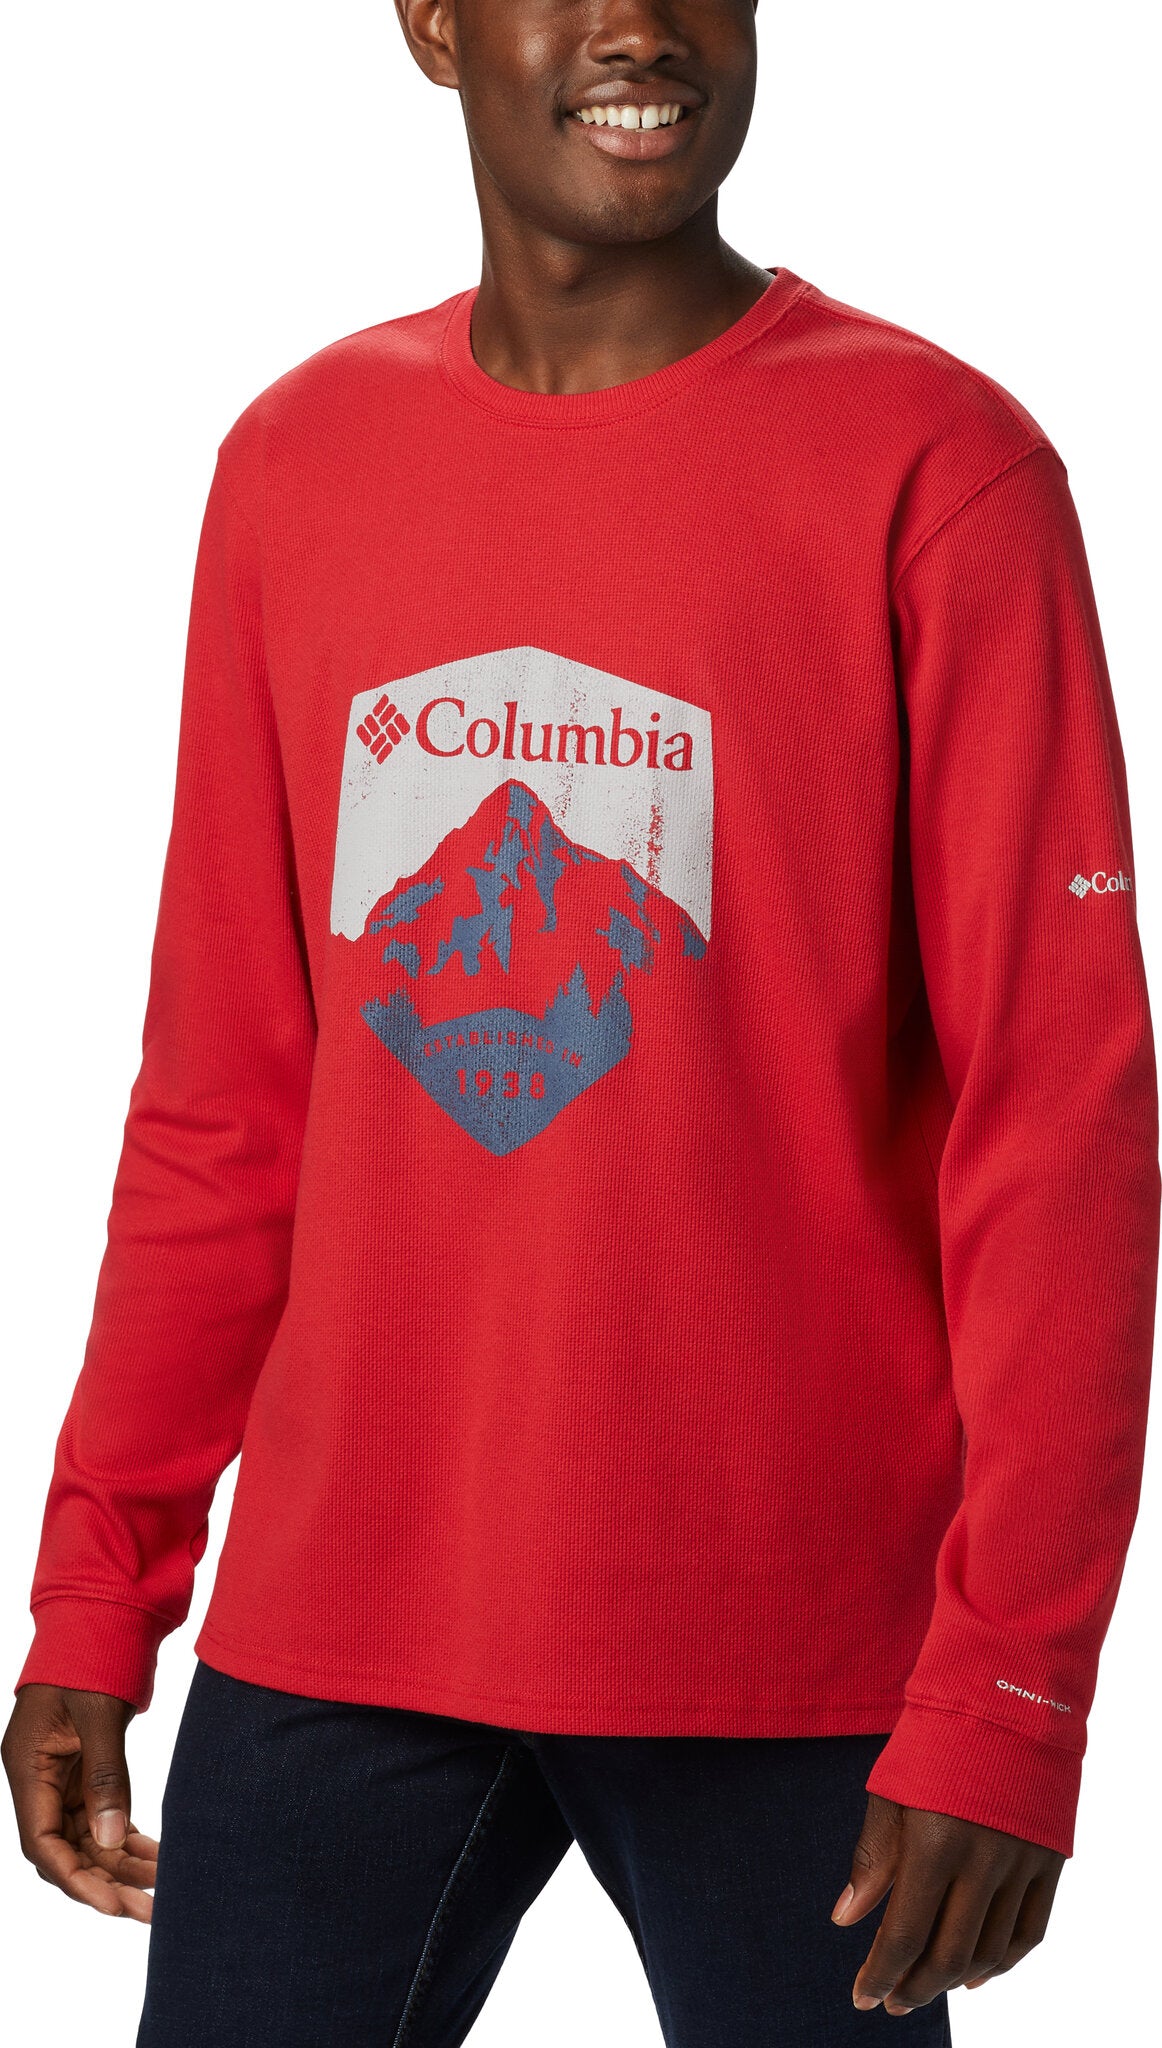 red graphic long sleeve